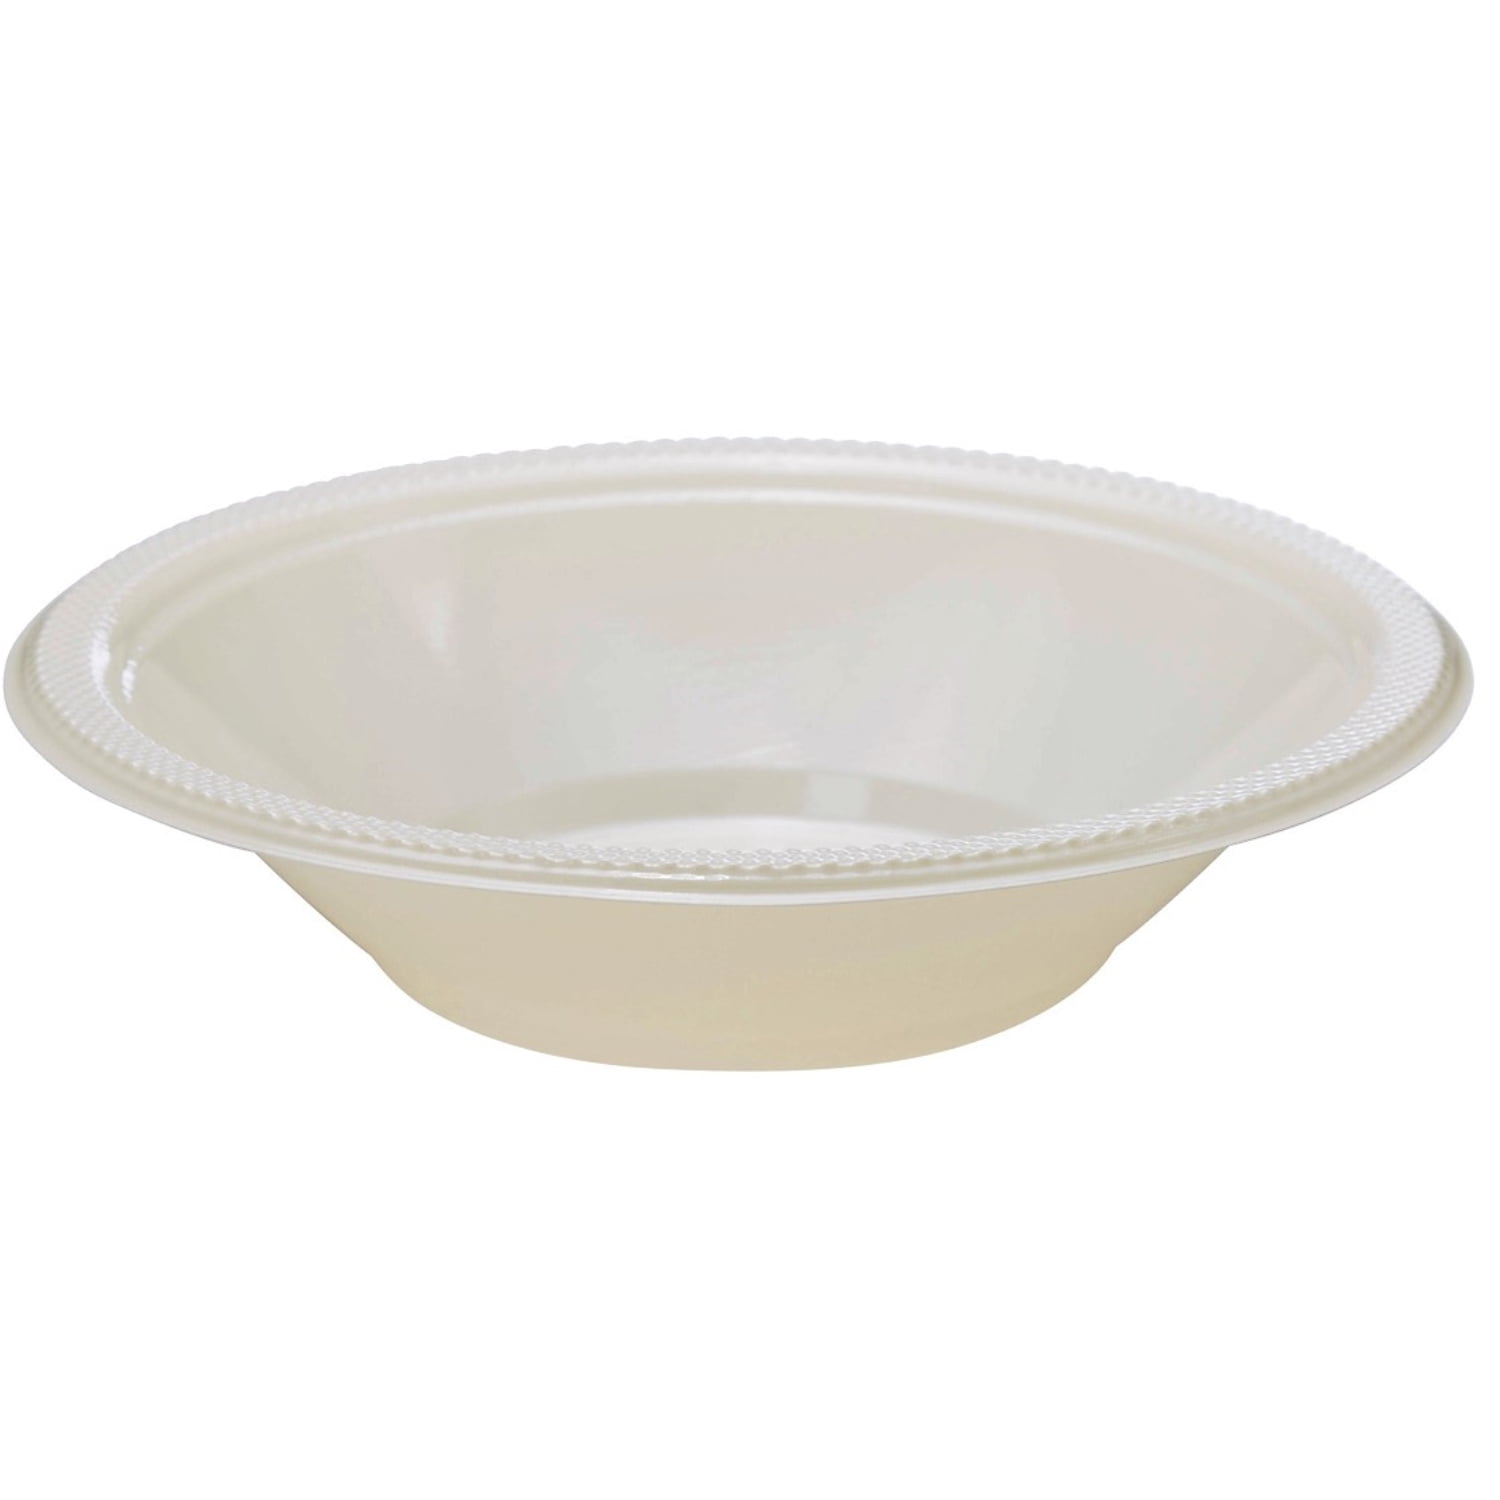 42 x WHITE PLASTIC BOWLS 12oz DISPOSABLE CATERING PARTIES PARTY SUPPLIES FOOD 